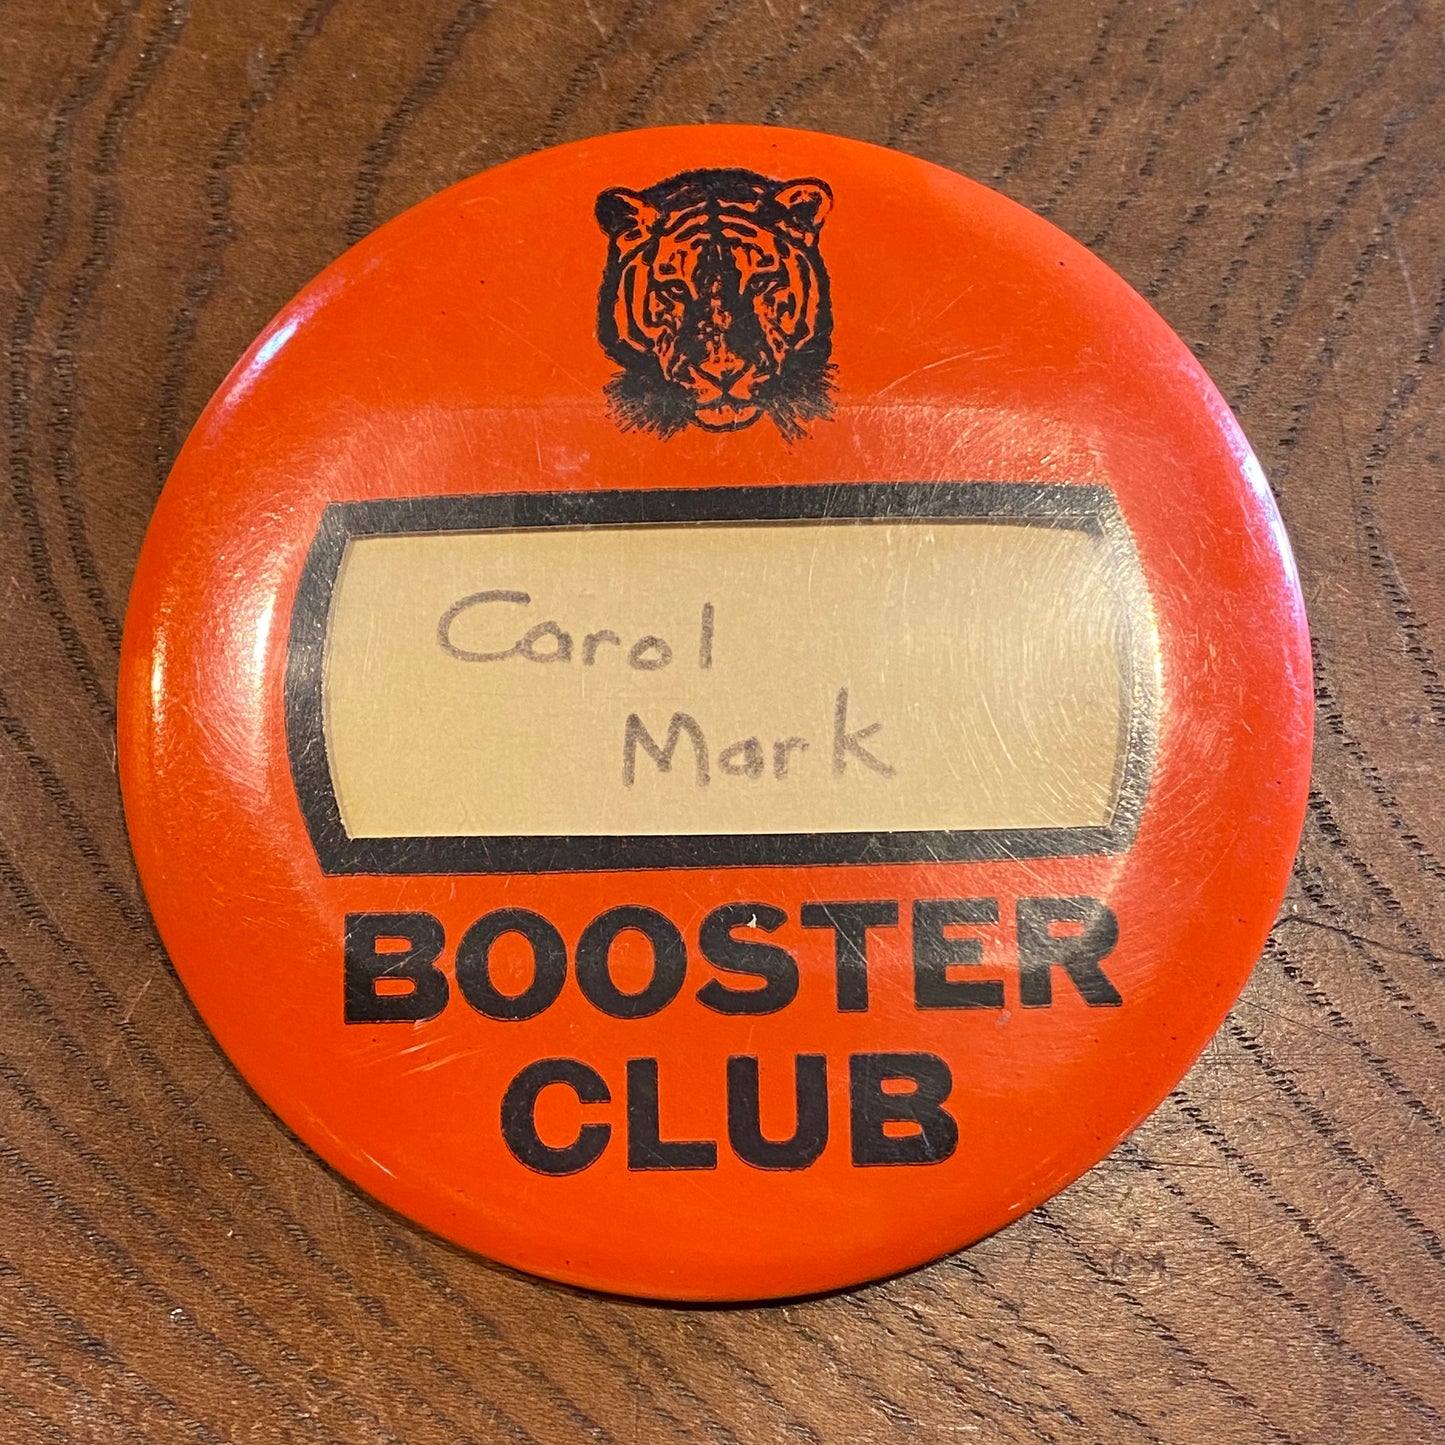 【1982 USA vintage】缶バッジ BOOSTER CLUB